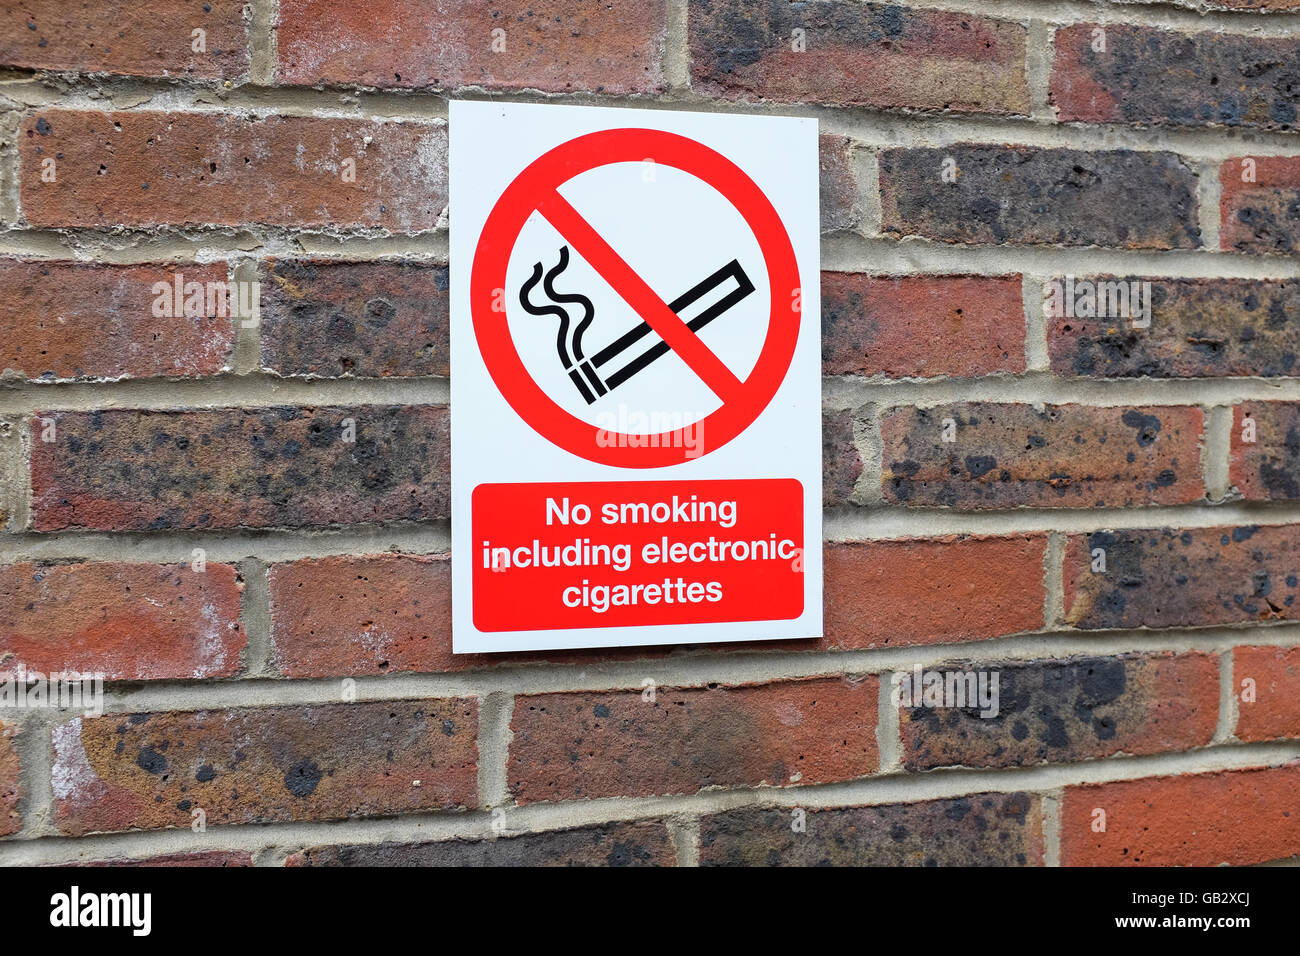 A 'no smoking sign' for electronic cigarettes as well as regular cigarettes. Stock Photo